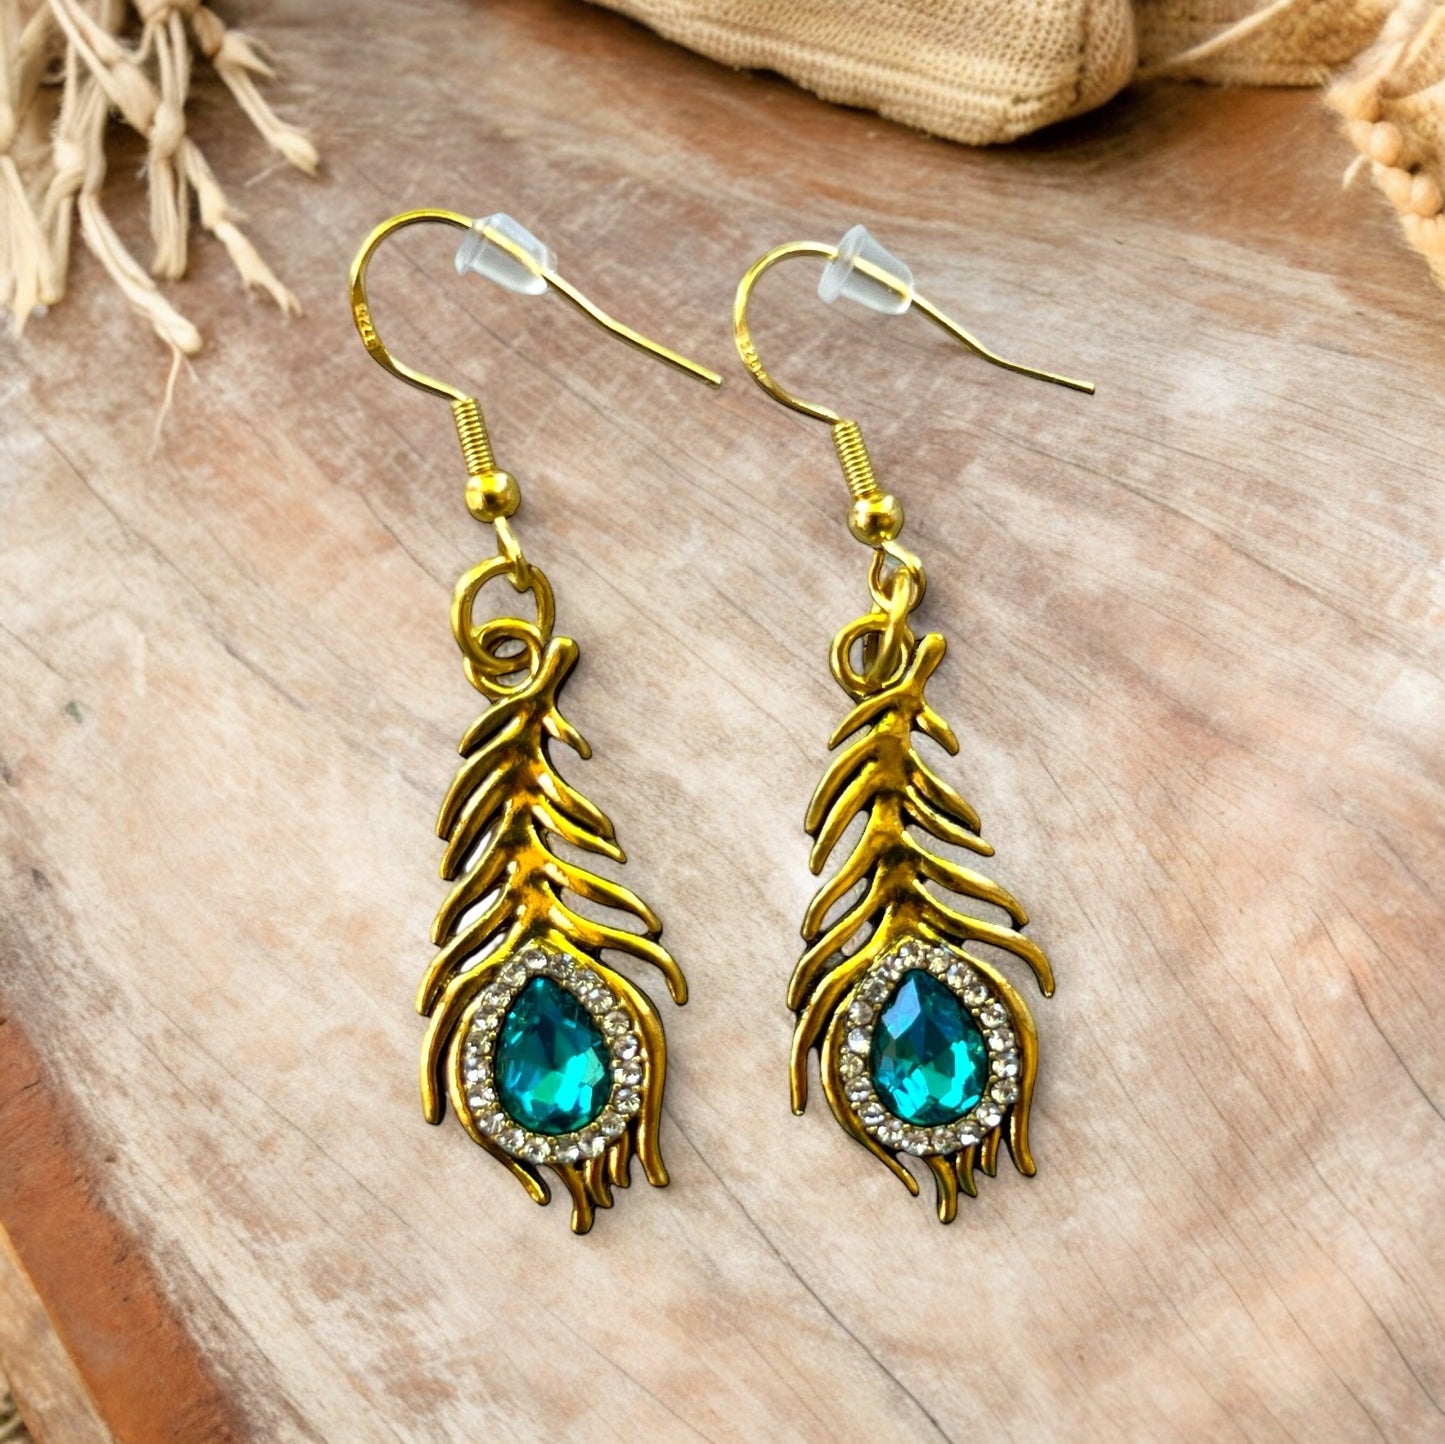 Gold Peacock Feather Dangle Earrings with Rhinestones: Elegant Eye-Catching Accessories